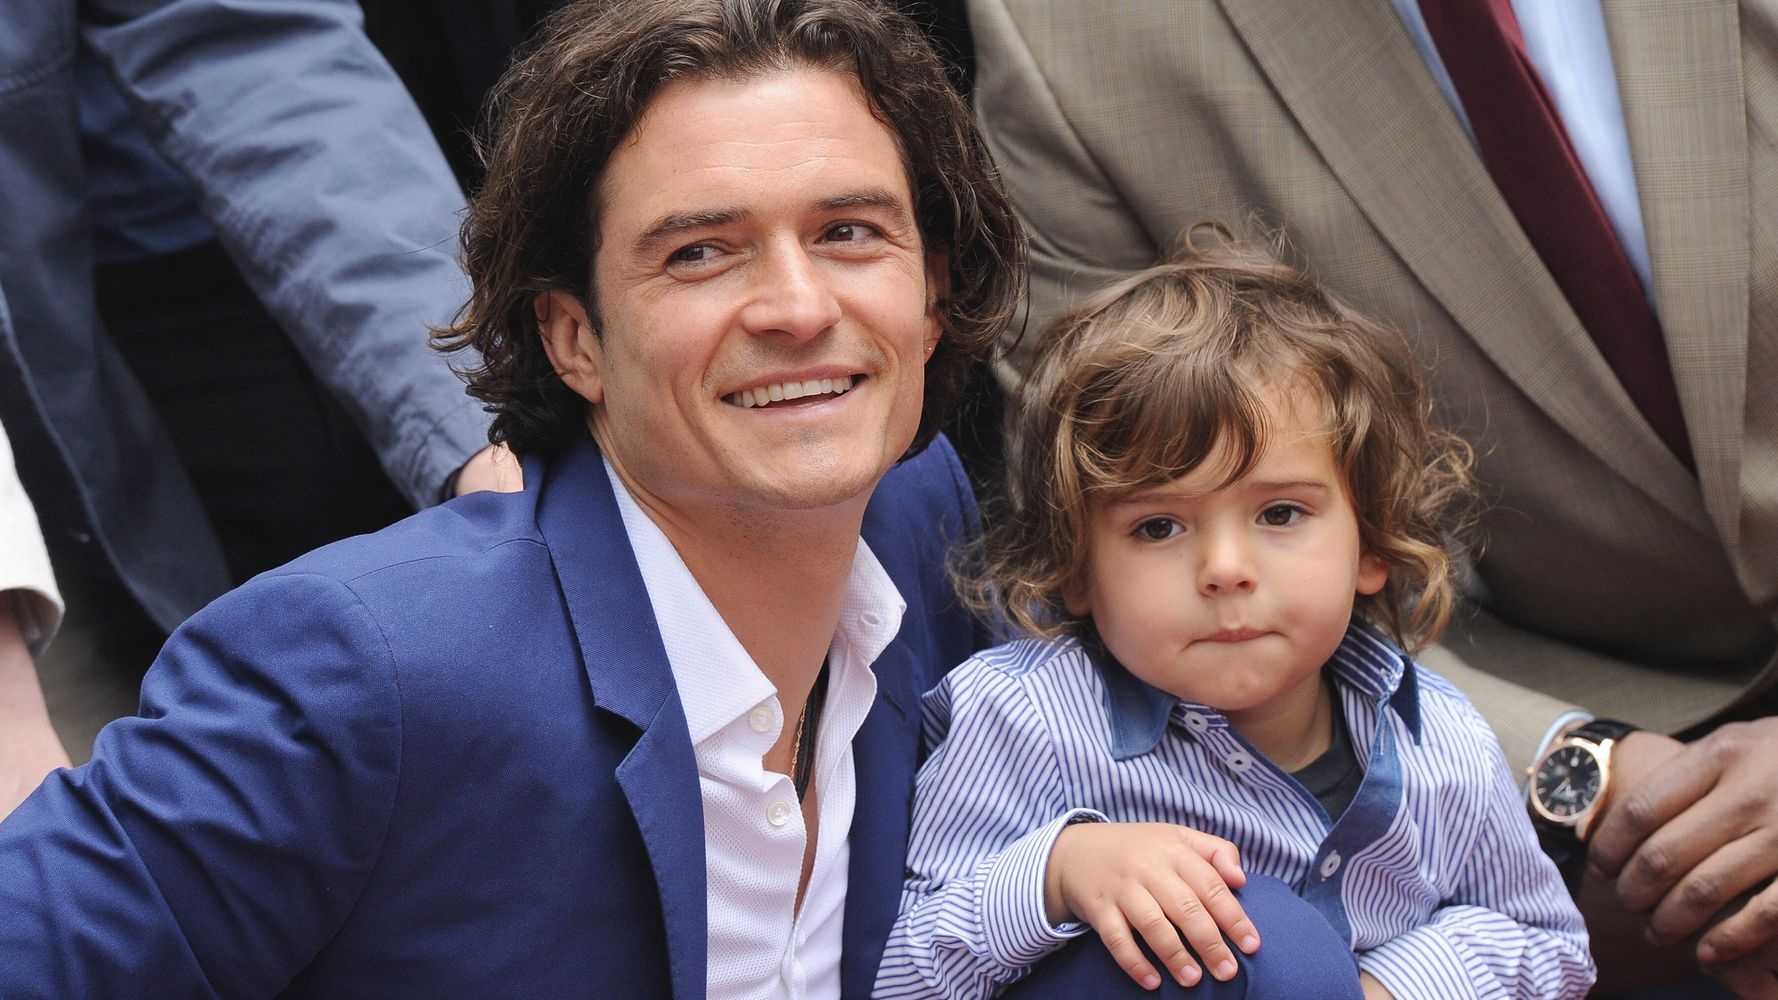 TOP 8 most good-looking celeb dads in the US